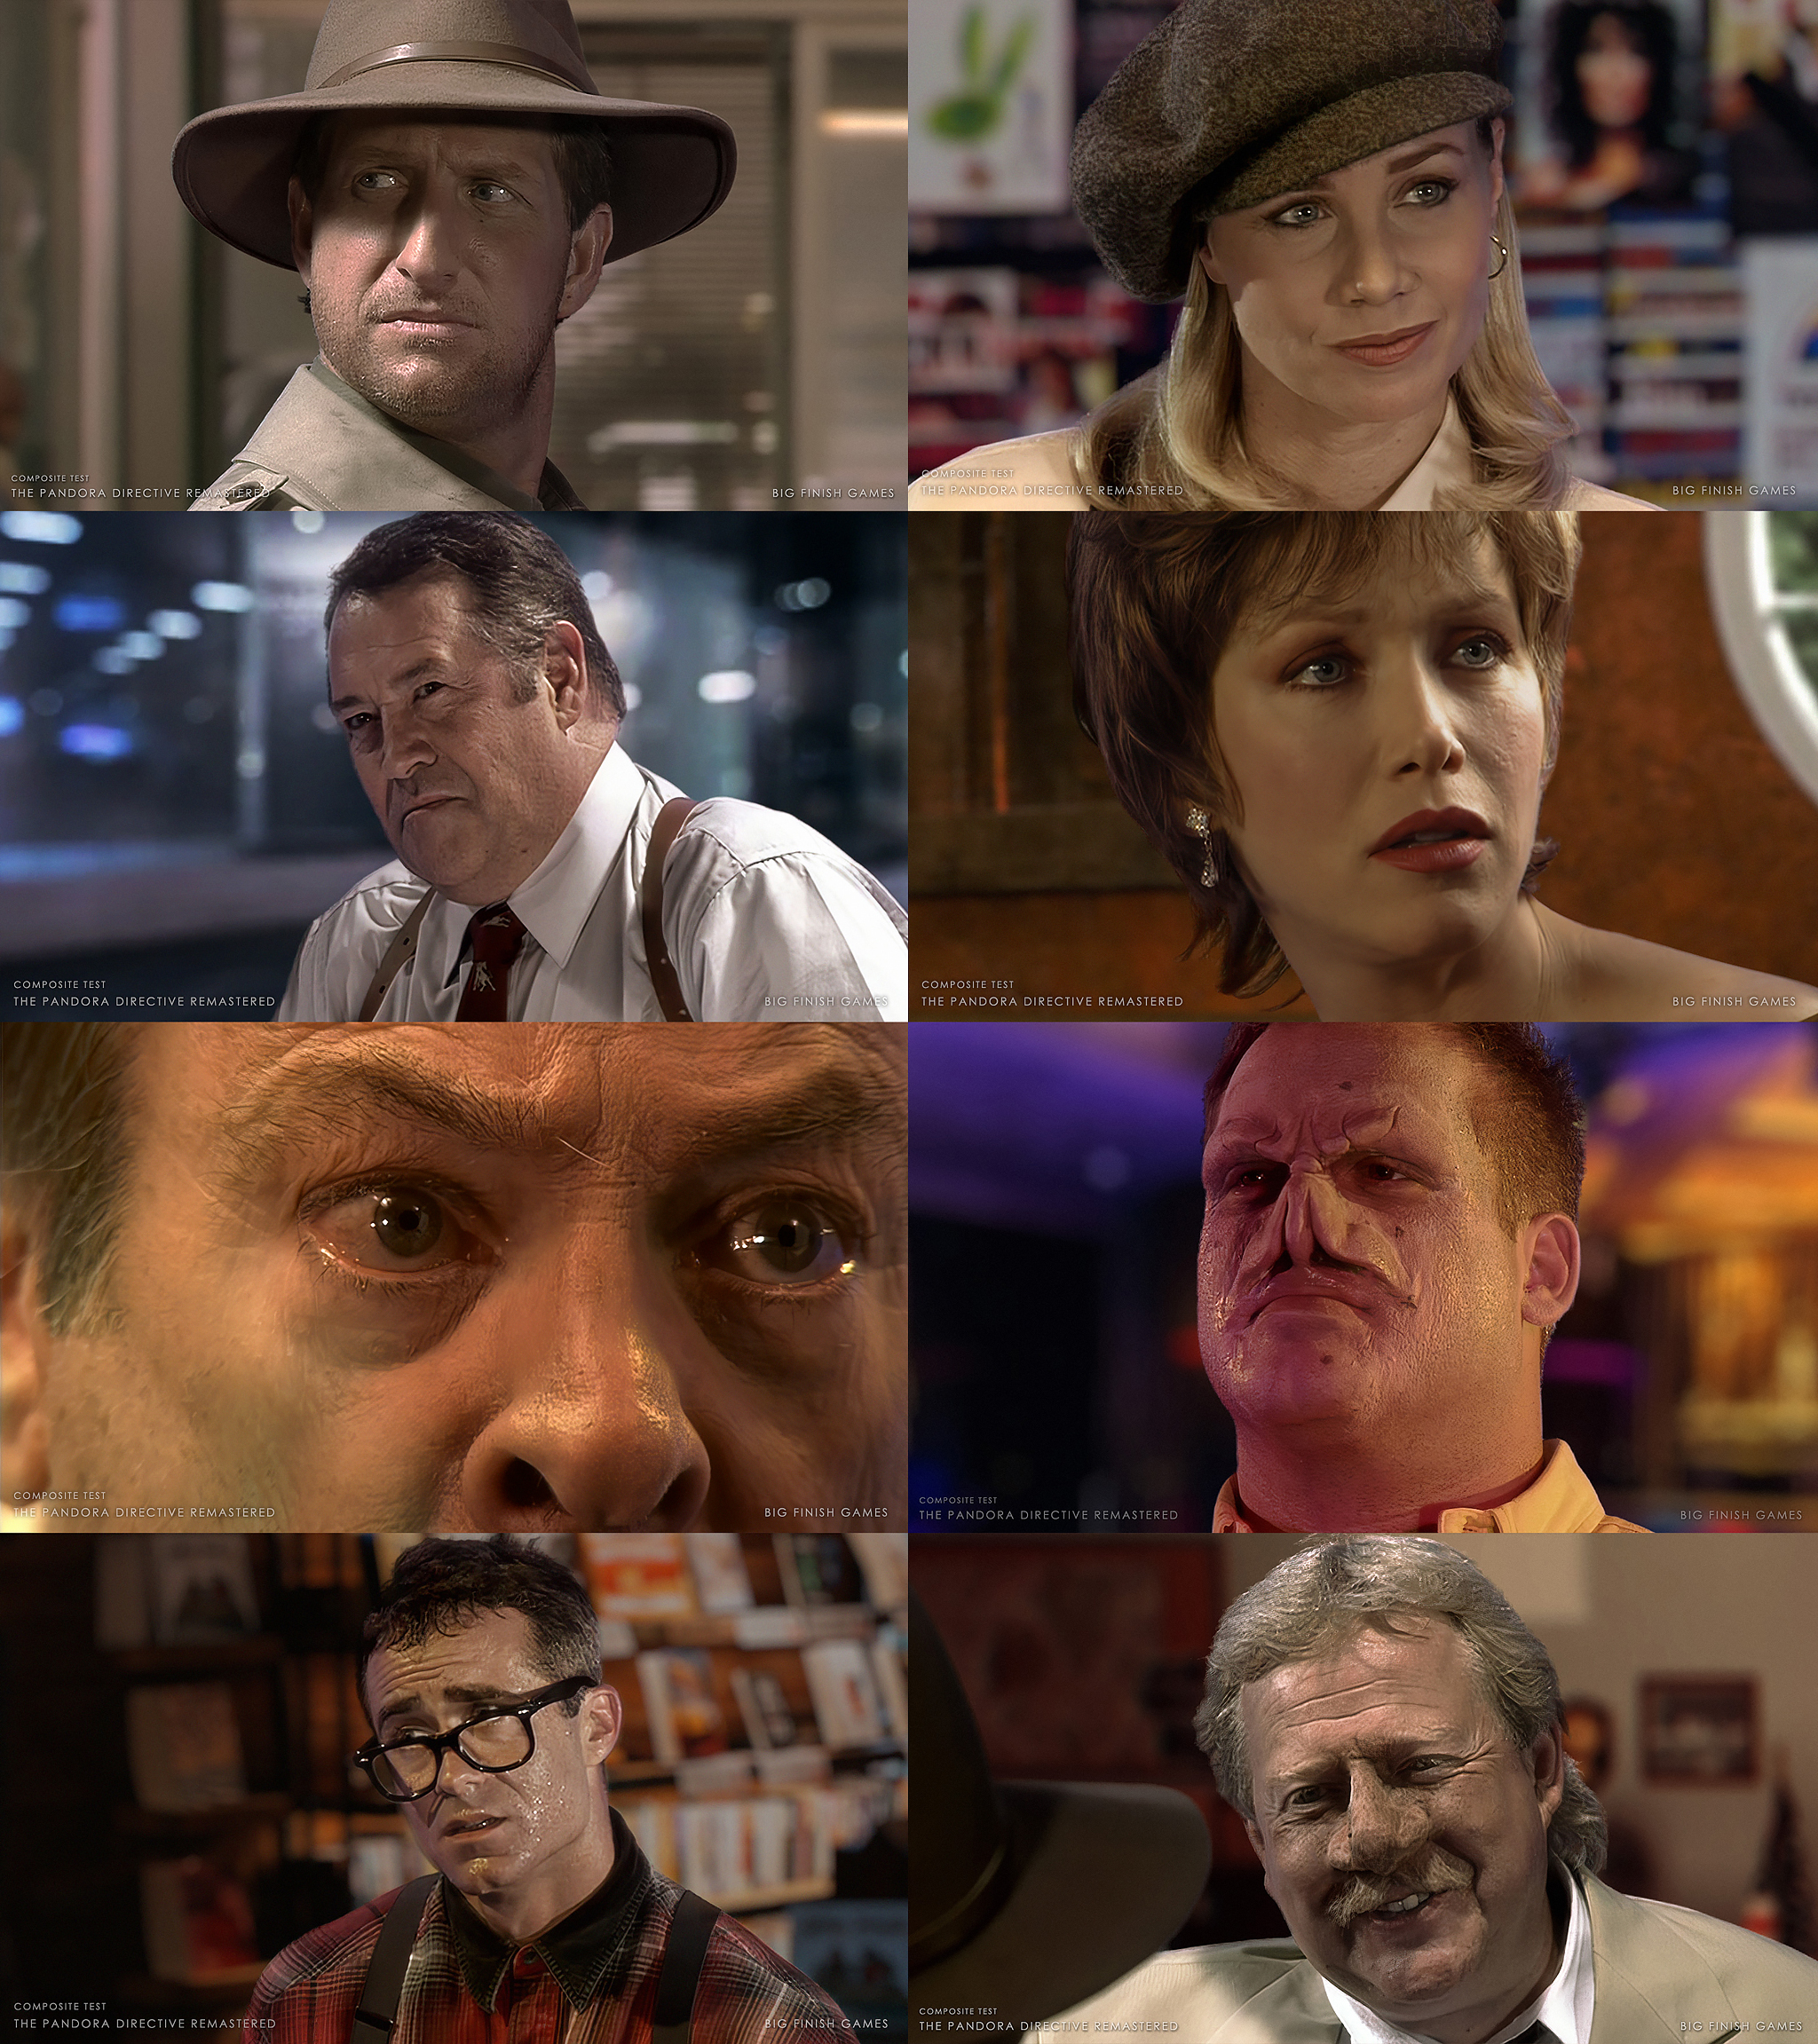 A series of 8 images showcasing the quality of The Pandora Directive remaster. Each image features temporary composite test backgrounds. From Top left and down: Tex Murphy looking over his shoulder in Mac Malden's office. Chelsee Bando looking at Tex in the news stand. Jackson Cross looking marauding in his office. Regan looking at Tex in the savoy, concerned. A close up of Gordon Fitzpatrick's eyes. Gus Leach staring down at Tex in the Fuchsia Flamingo. Archie sweating and worried inside his bookstore, The Cosmic Connection. Mac Malden in his office, smiling at Tex.